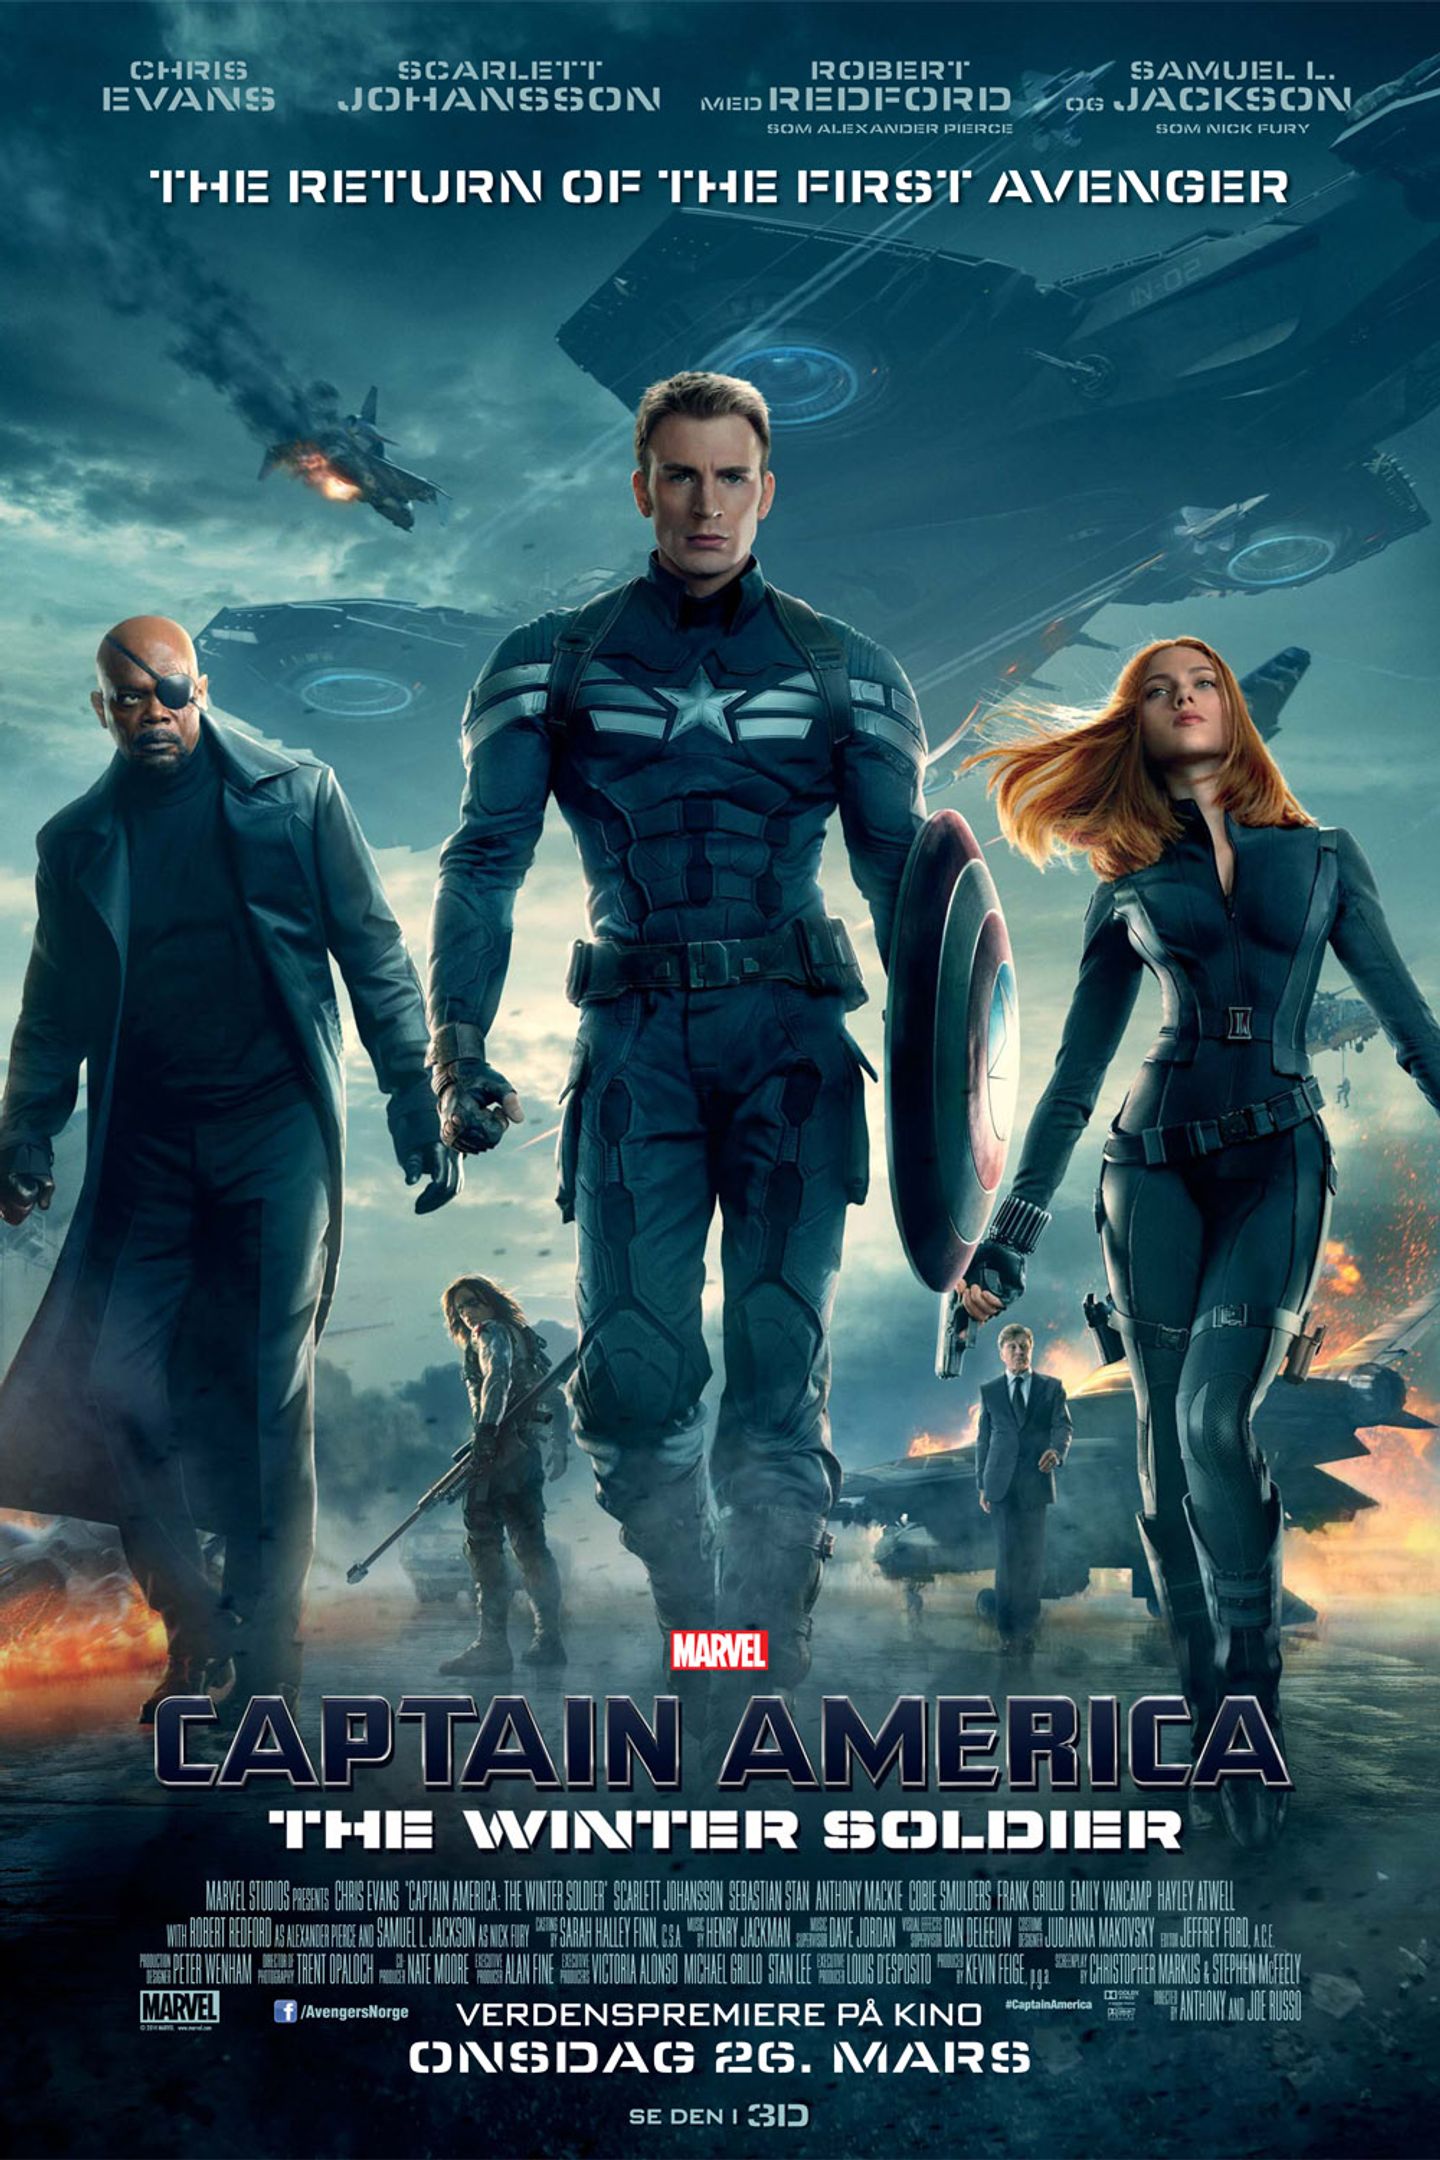 Plakat for 'Captain America: The Winter Soldier 3D'